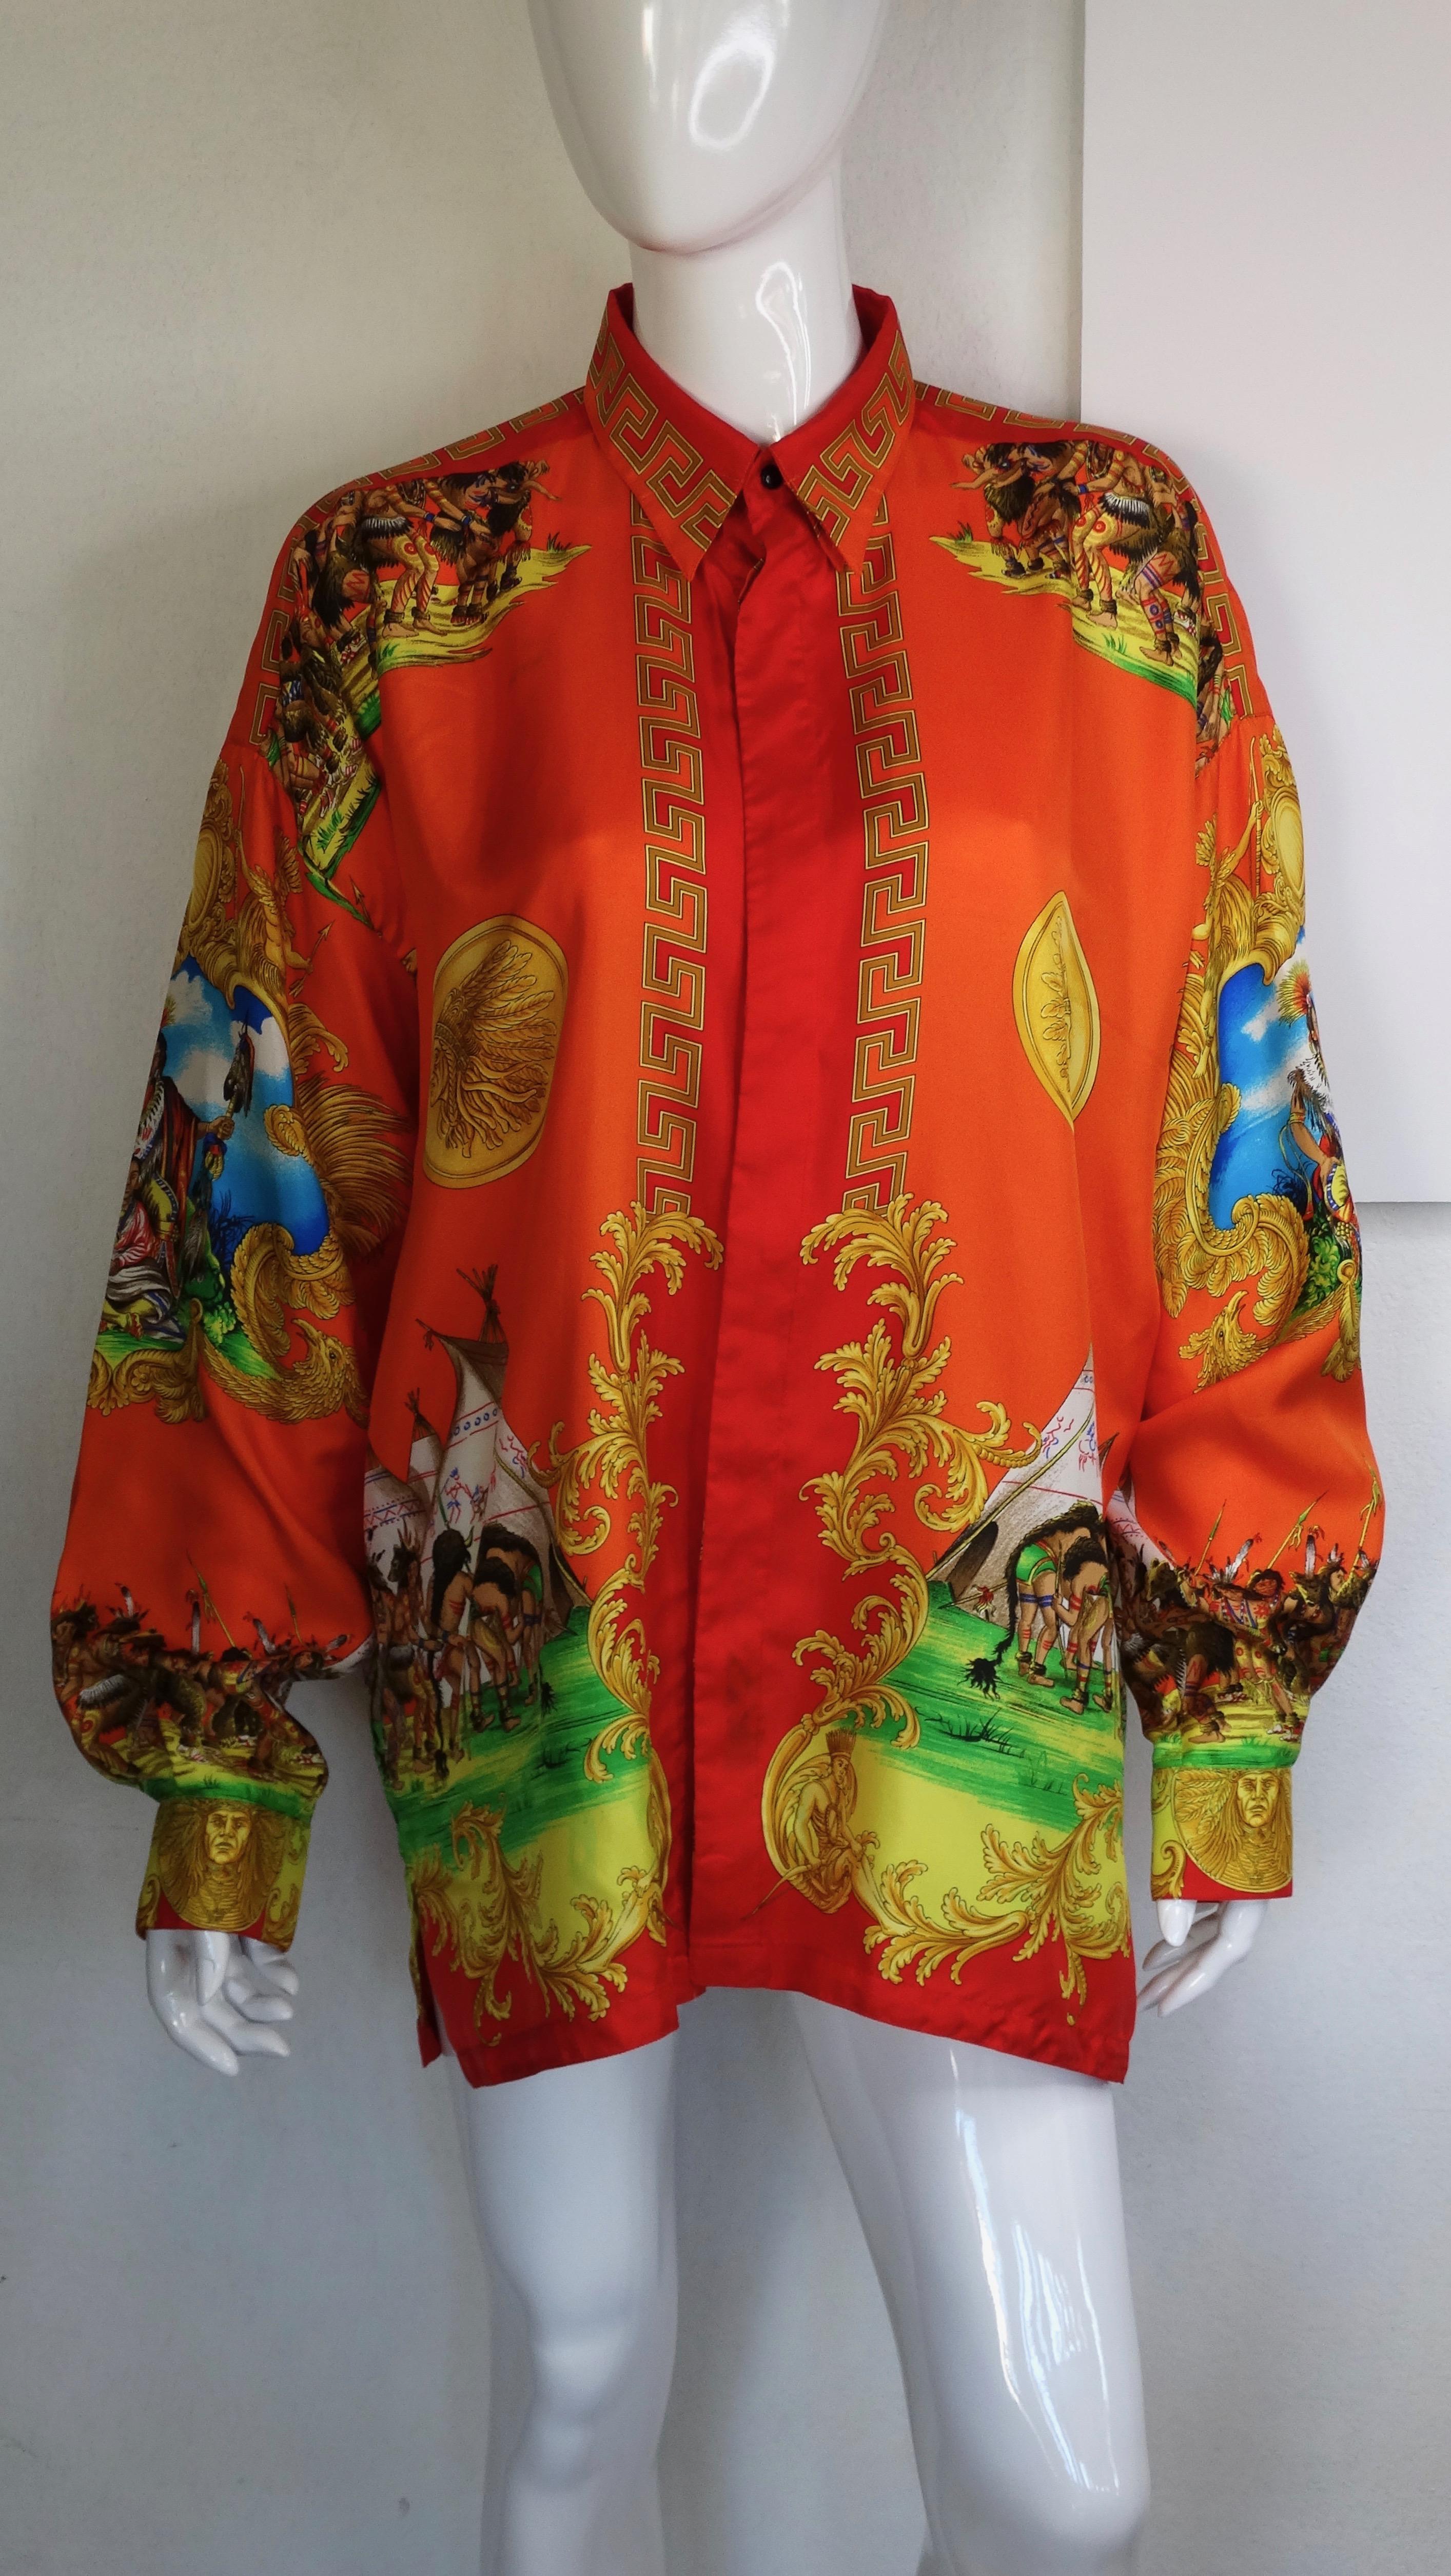 A very rare true piece of wearable art created by Gianni Versace, circa 1993. A beautiful Gianni Versace Silk Print in excellent condition, the 